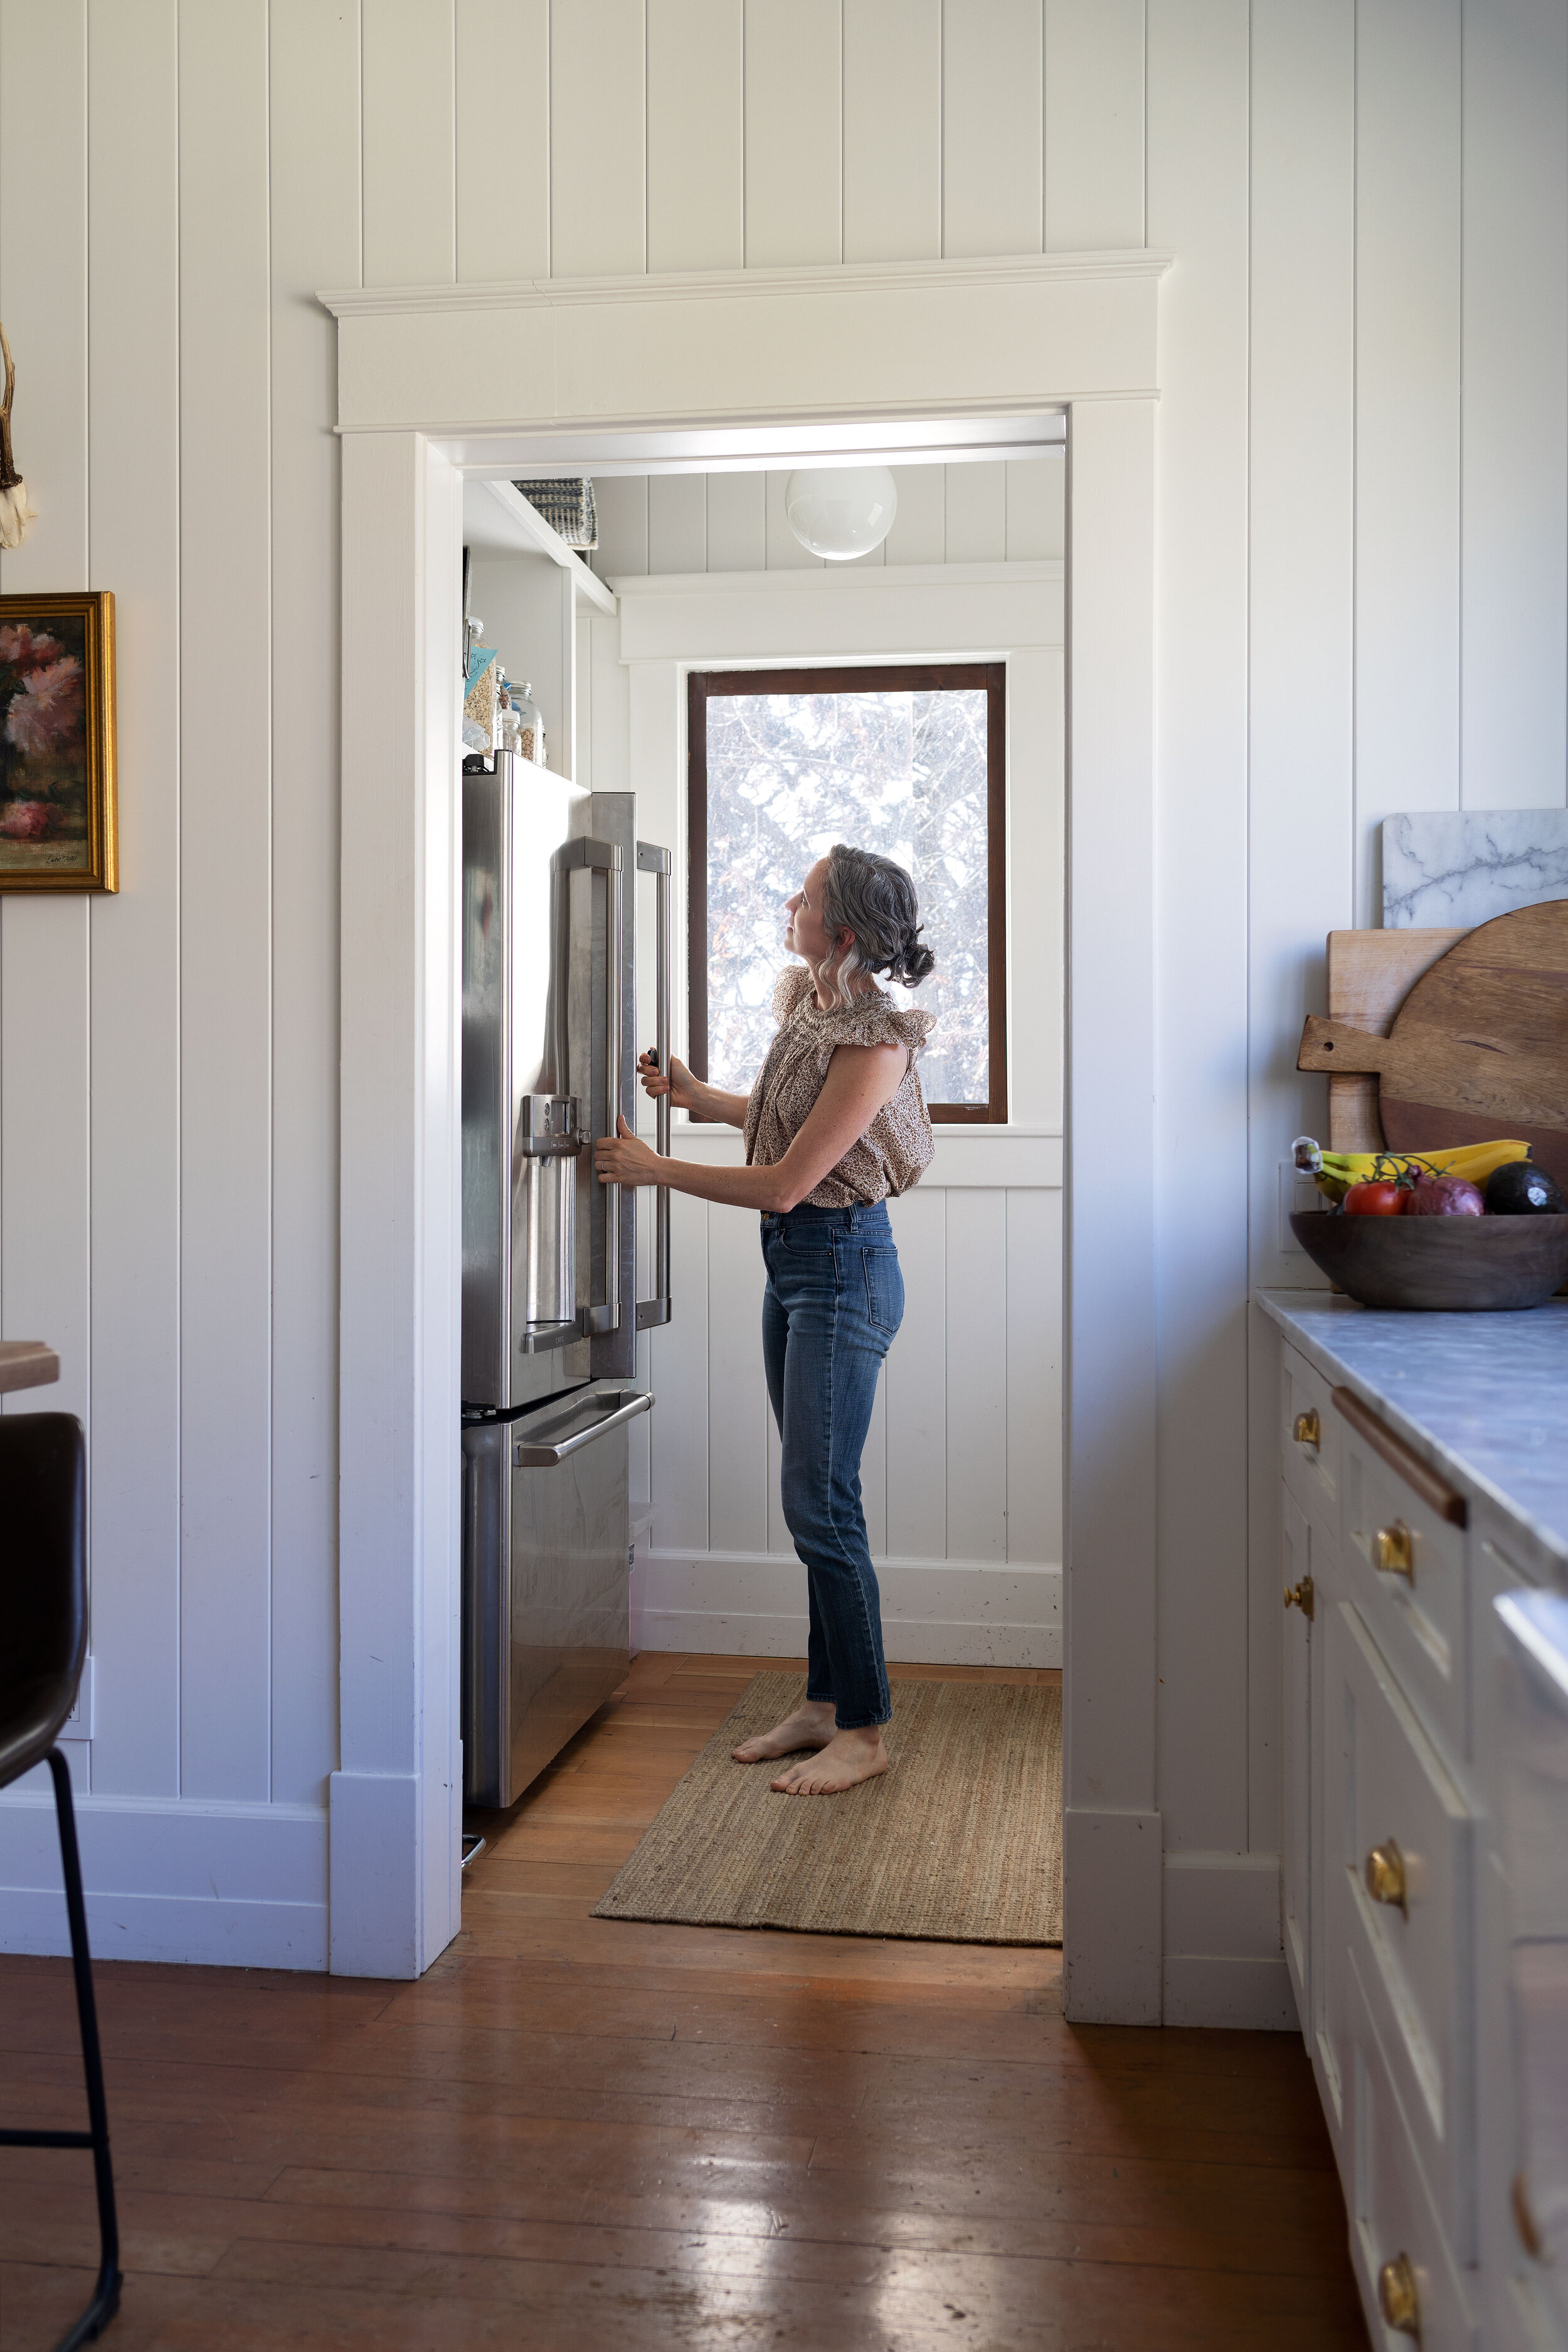 How to Design a Kitchen Pantry at Home